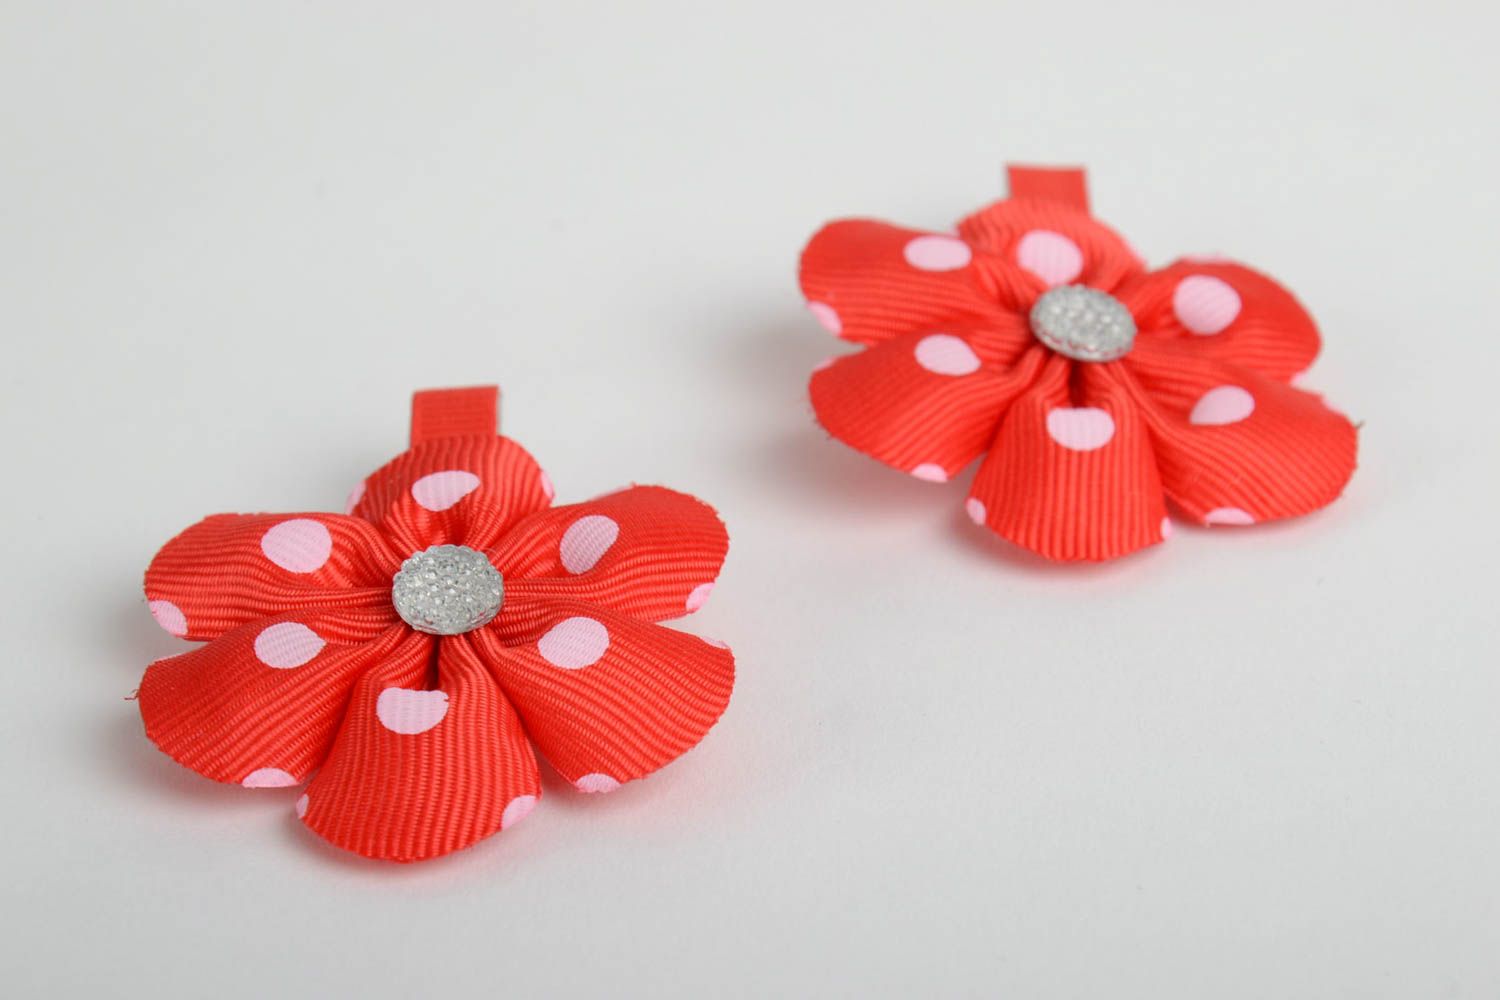 Handmade hair clips with red polka dot satin ribbon flowers set of 2 items photo 4